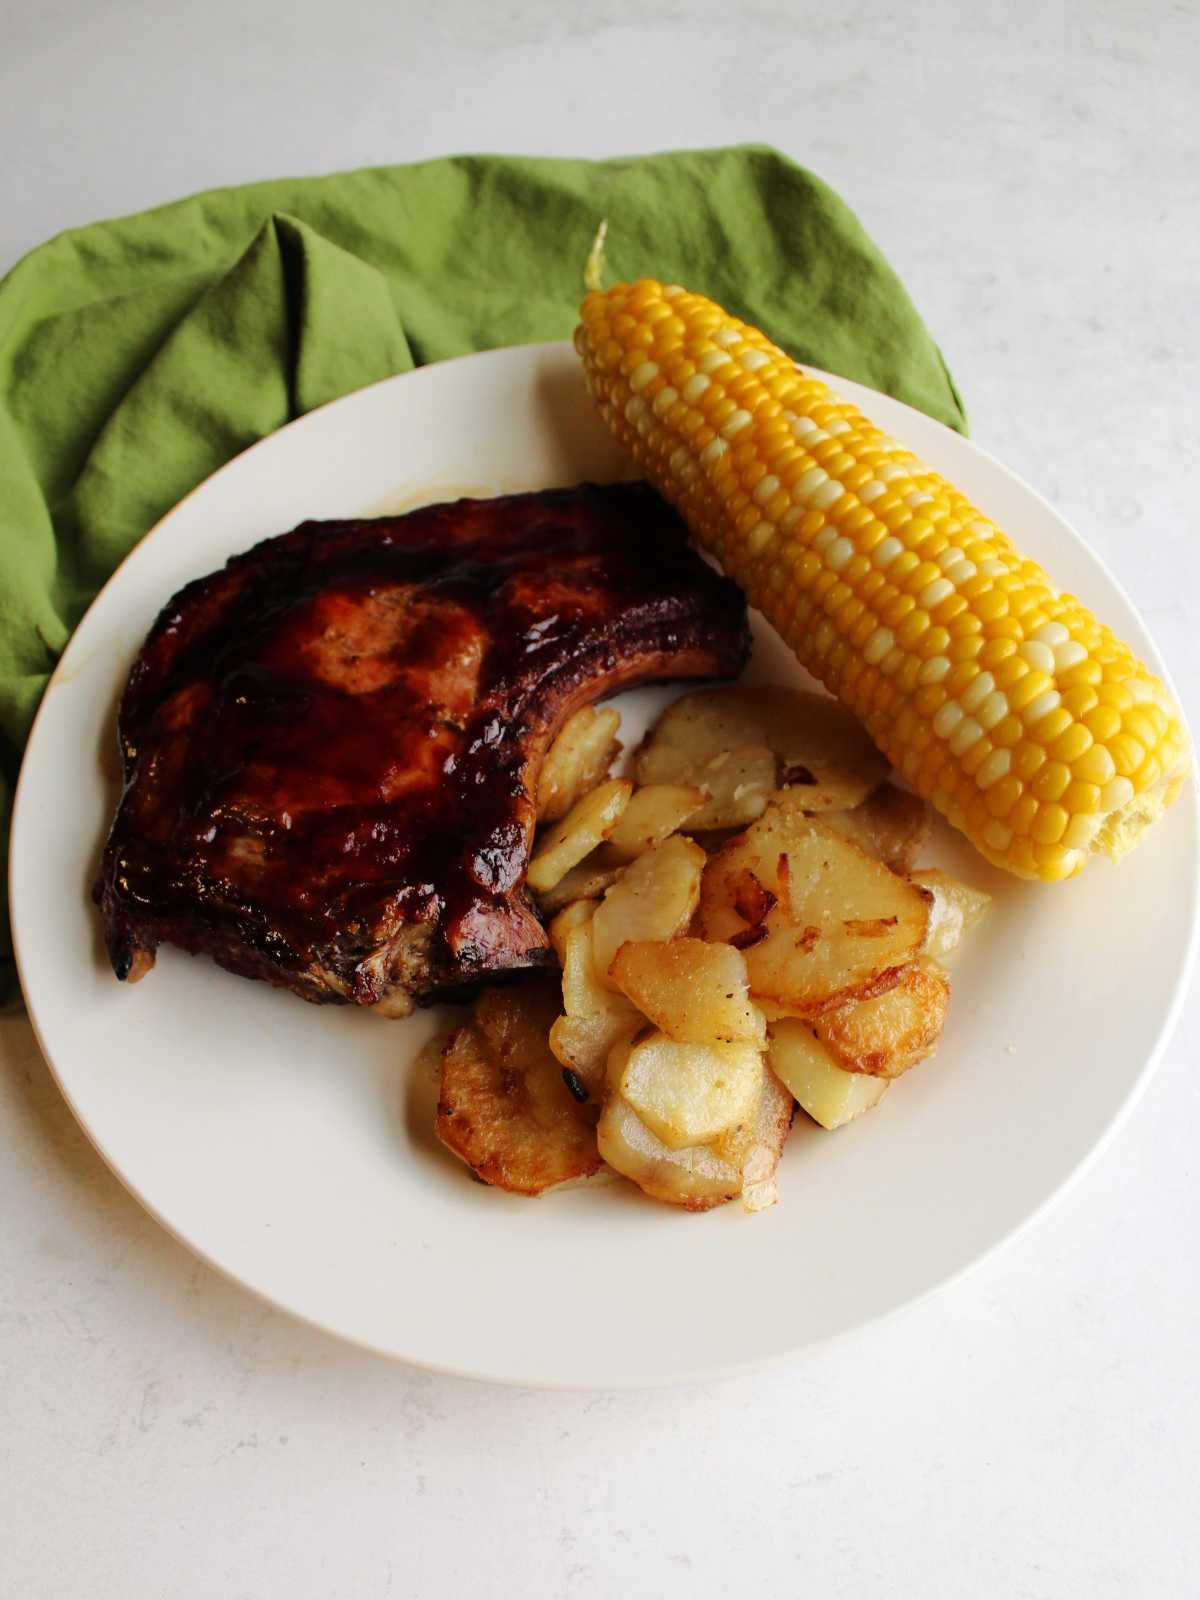 Plate of fried potatoes, BBQ pork chop and corn on the cob.